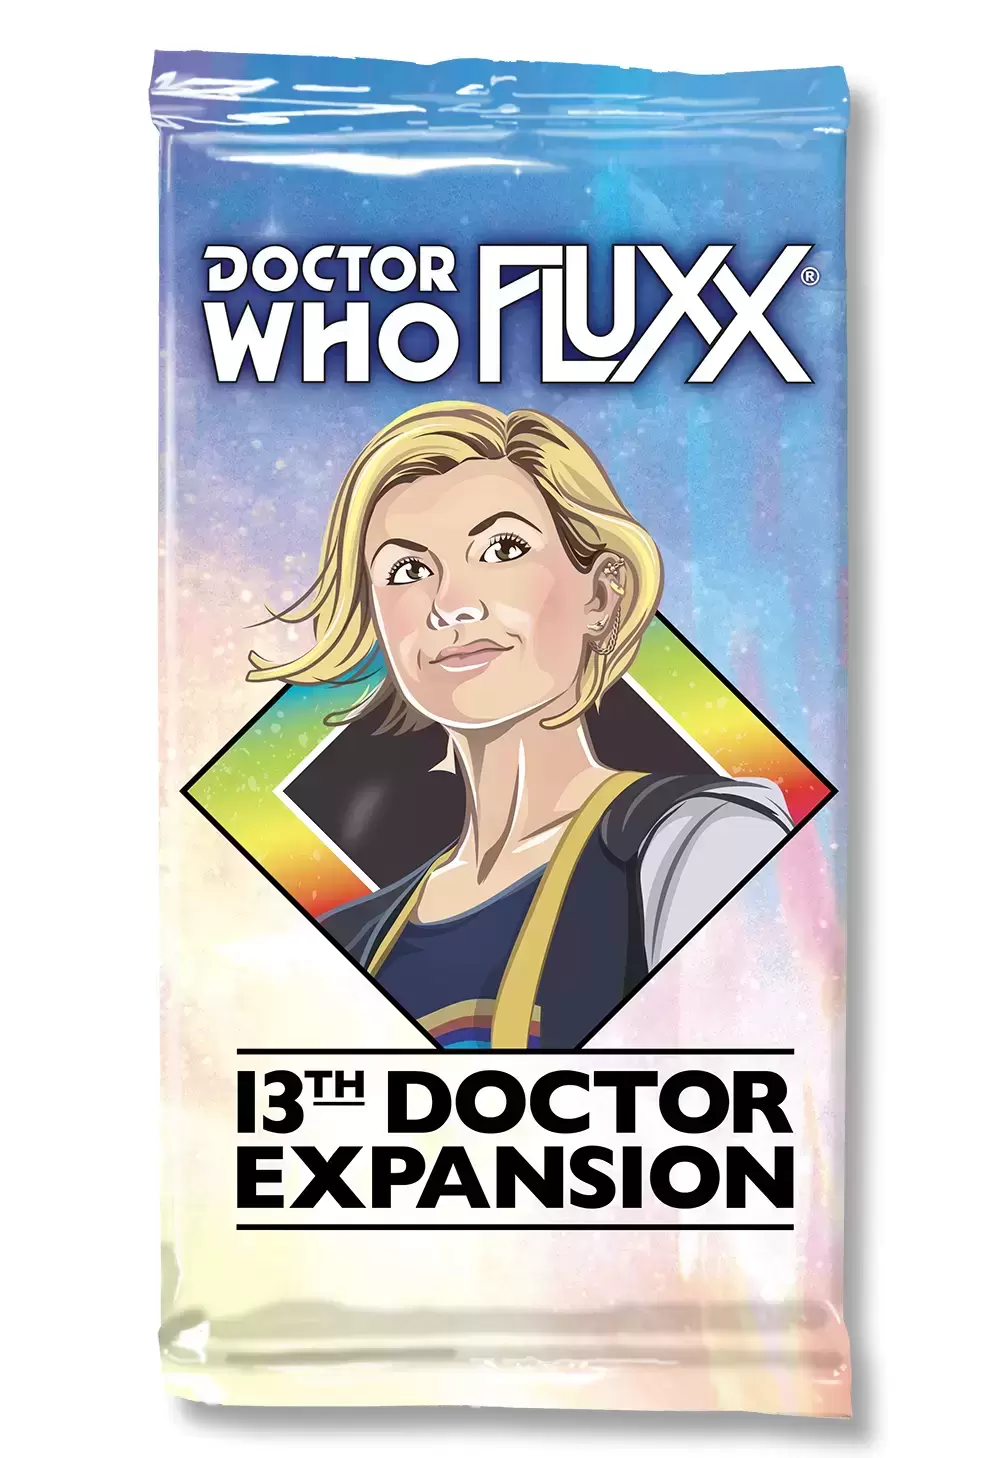 Fluxx - Doctor Who Fluxx - 13th Doctor Expansion